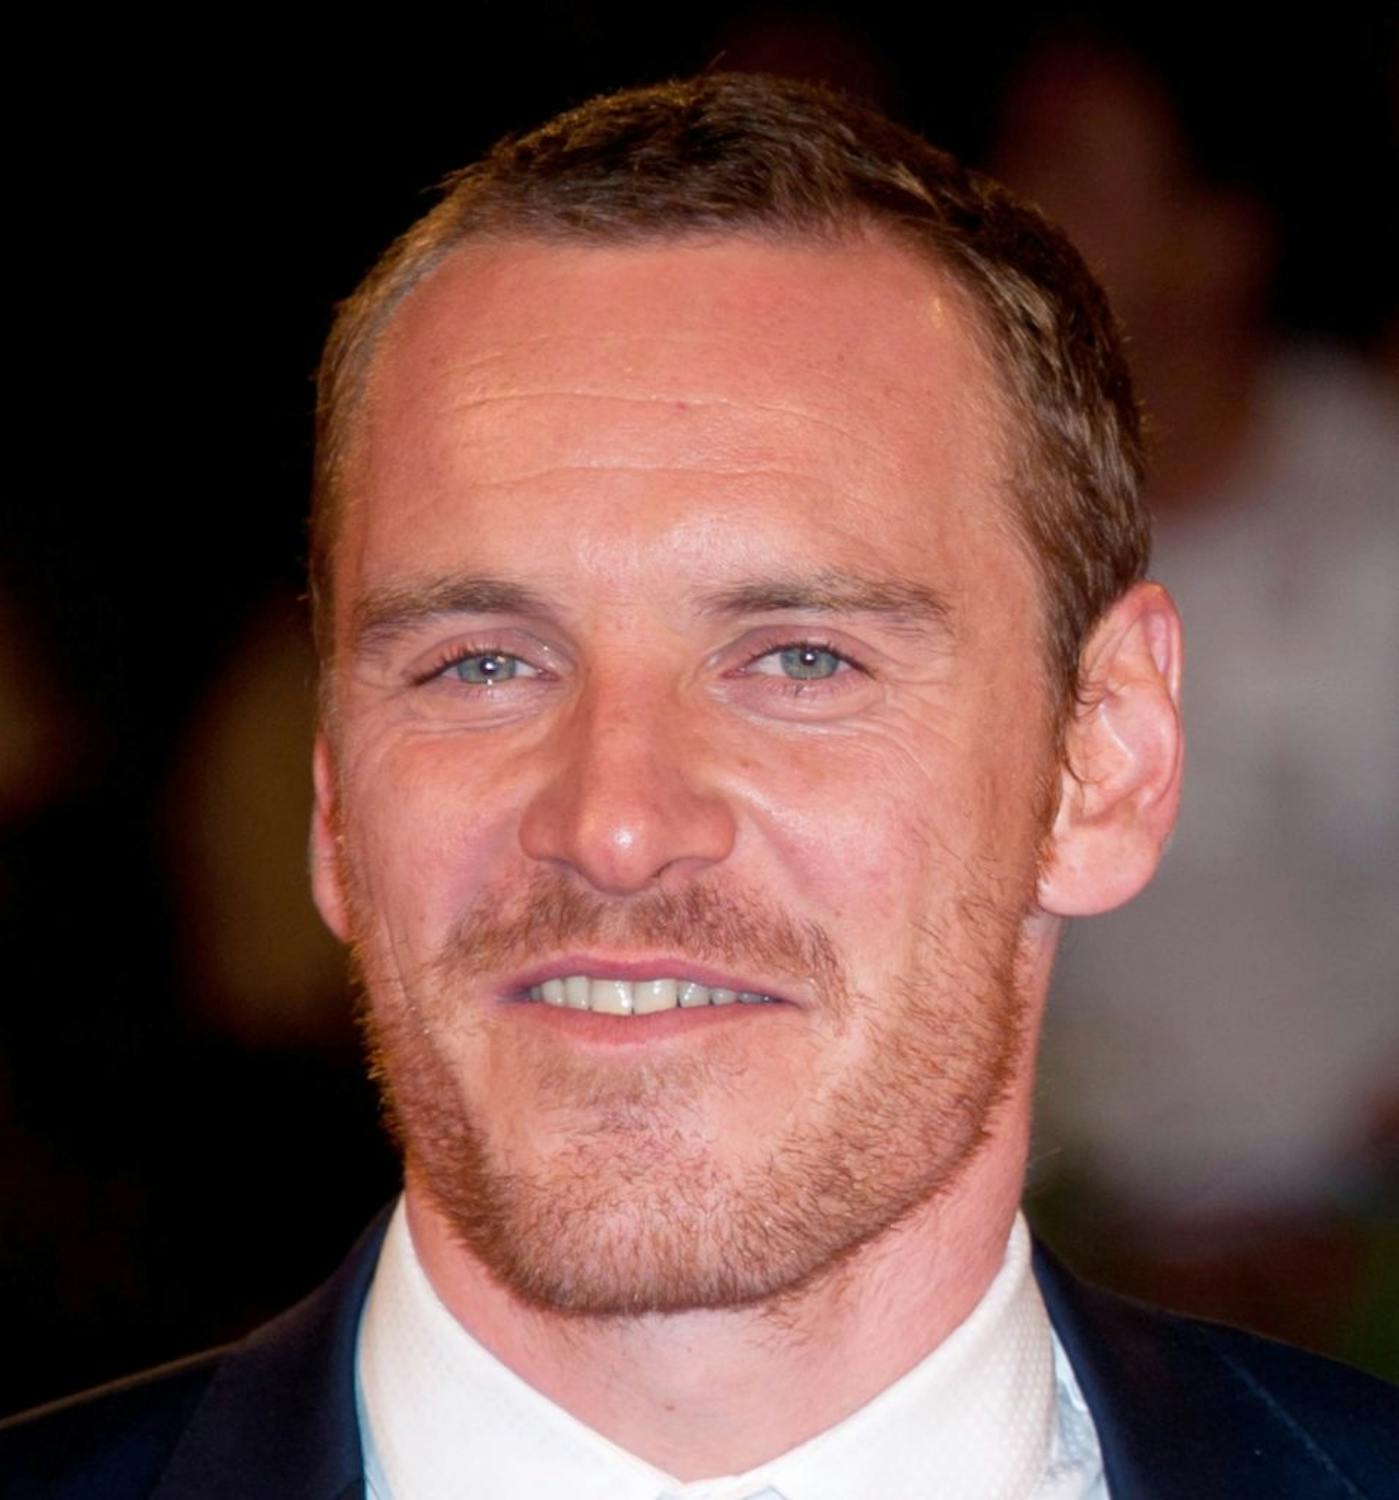 Michael Fassbender Chats To Muireann About Kerry And Cars!